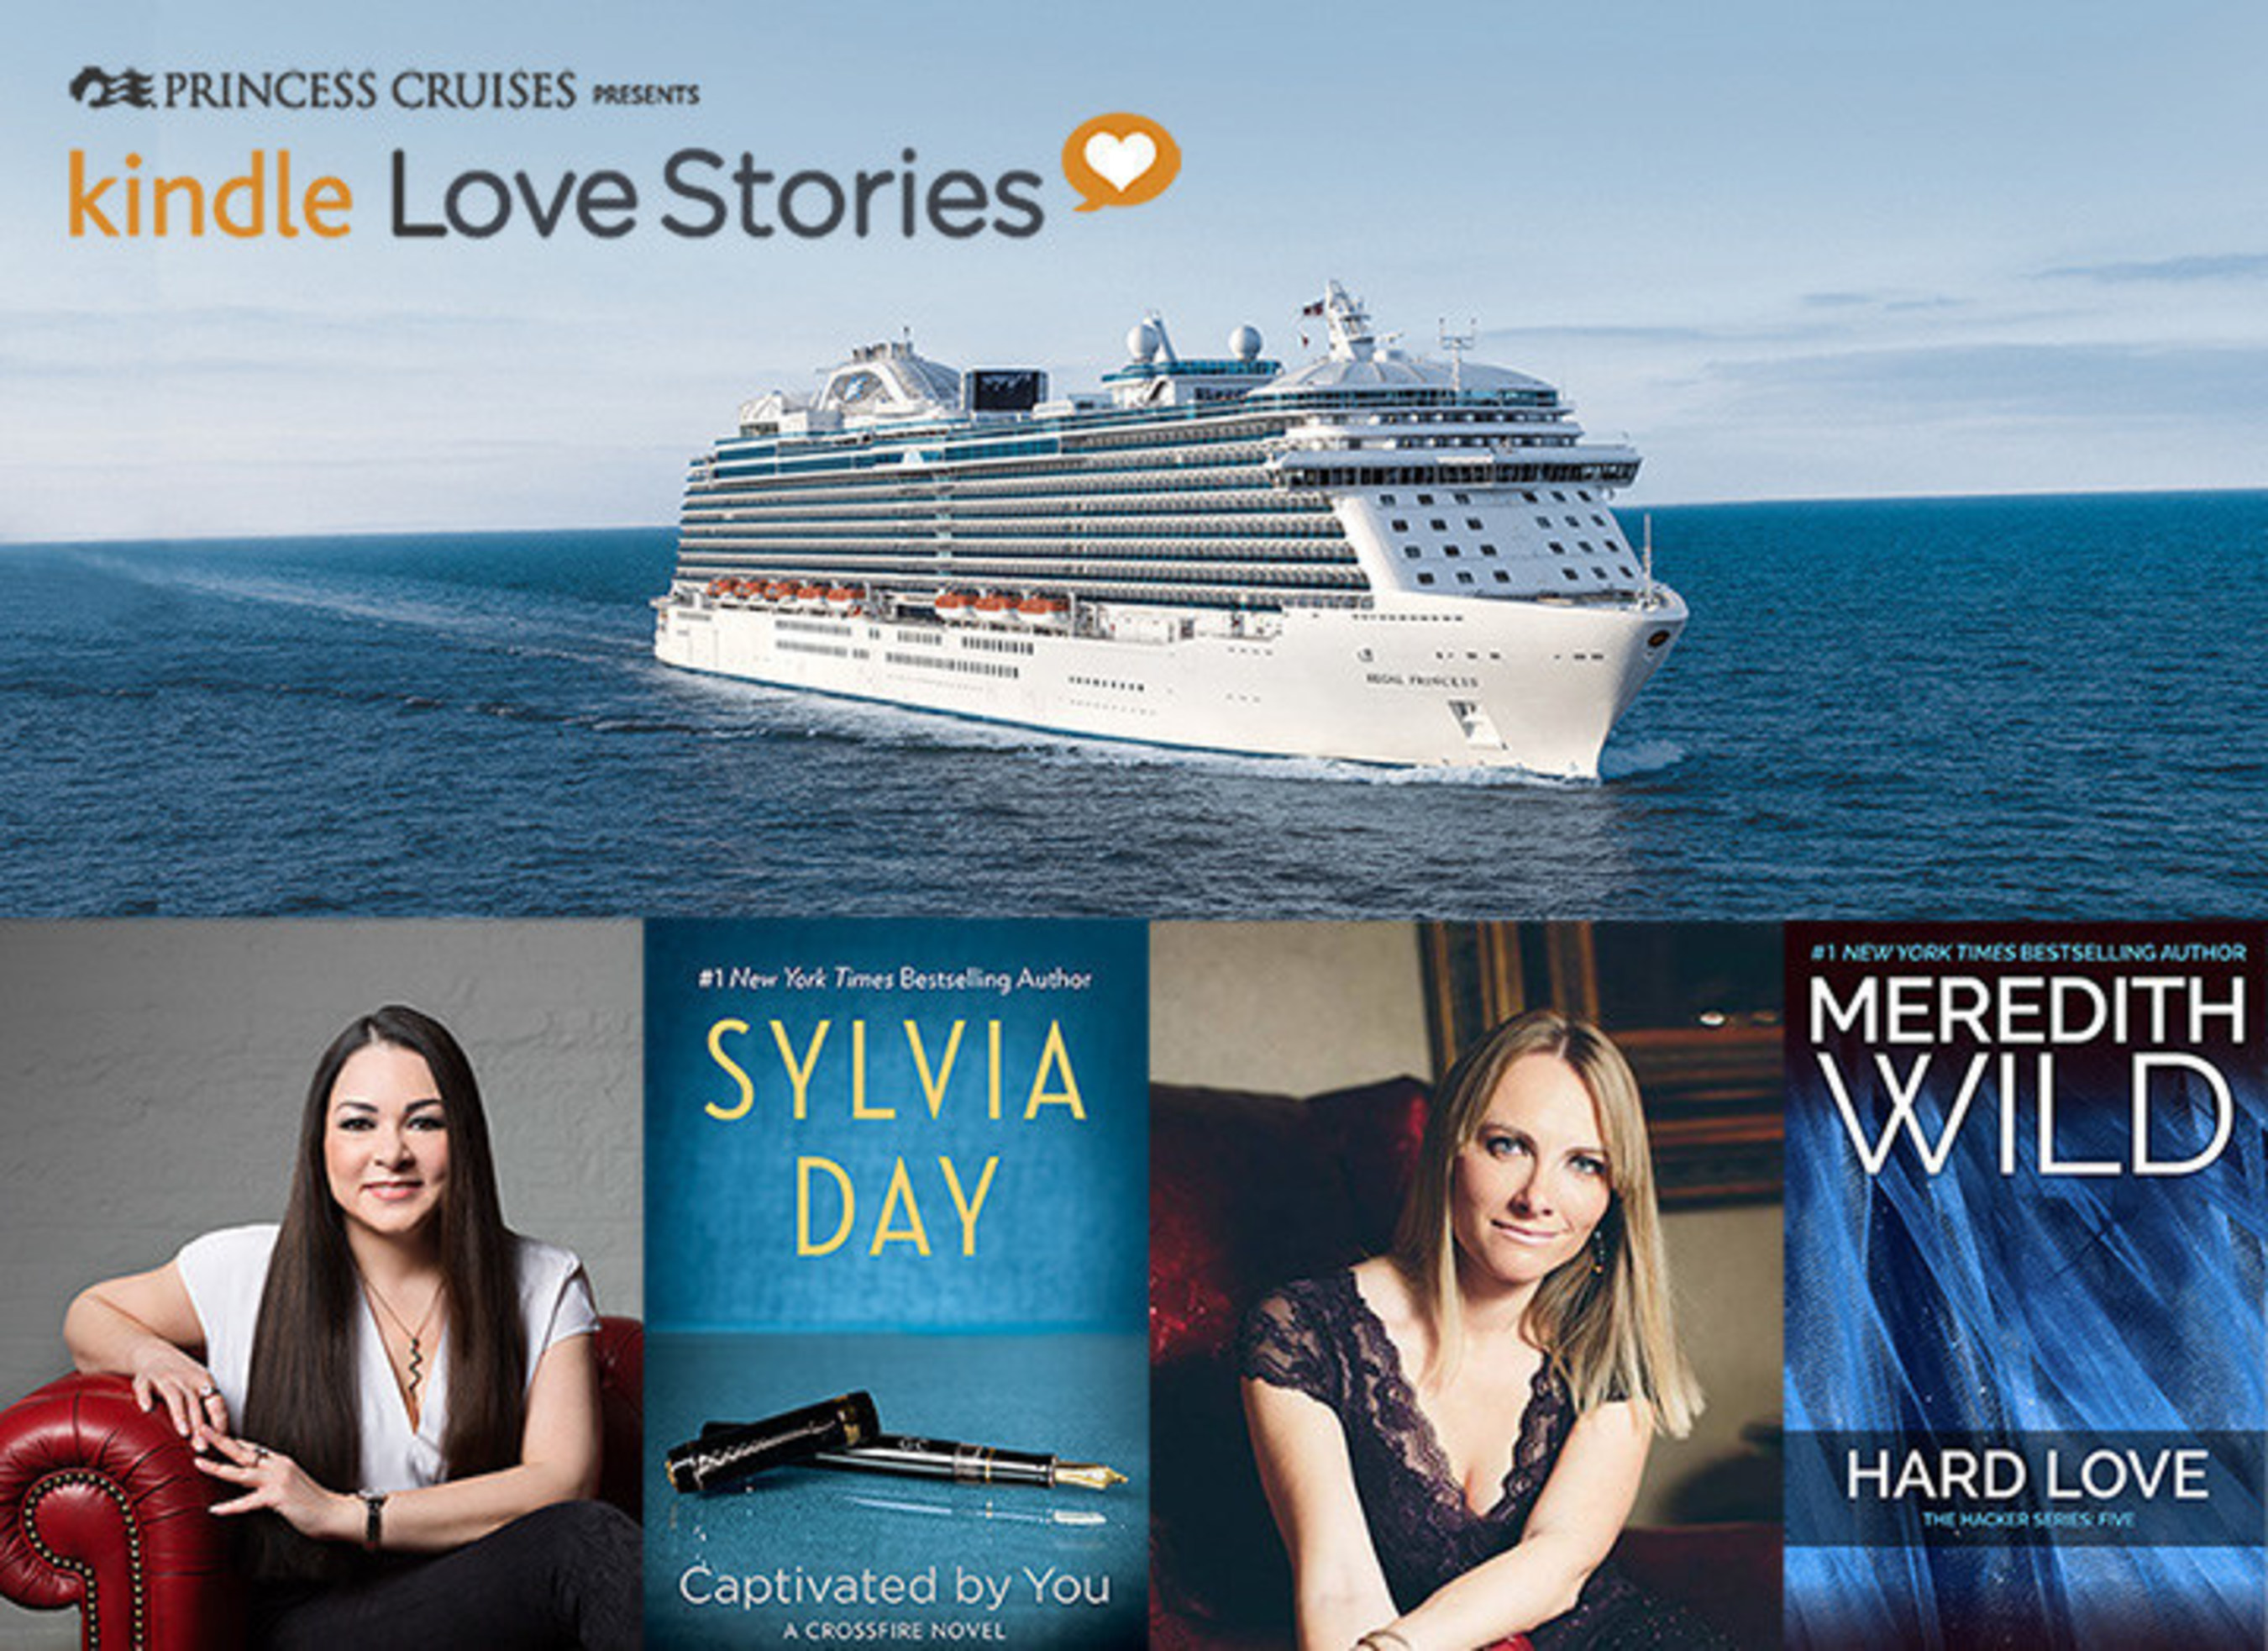 More information about the Royal Princess cruise vacation featuring romance authors Sylvia Day and Meredith Wild can be found here: www.princess.com/specialevents